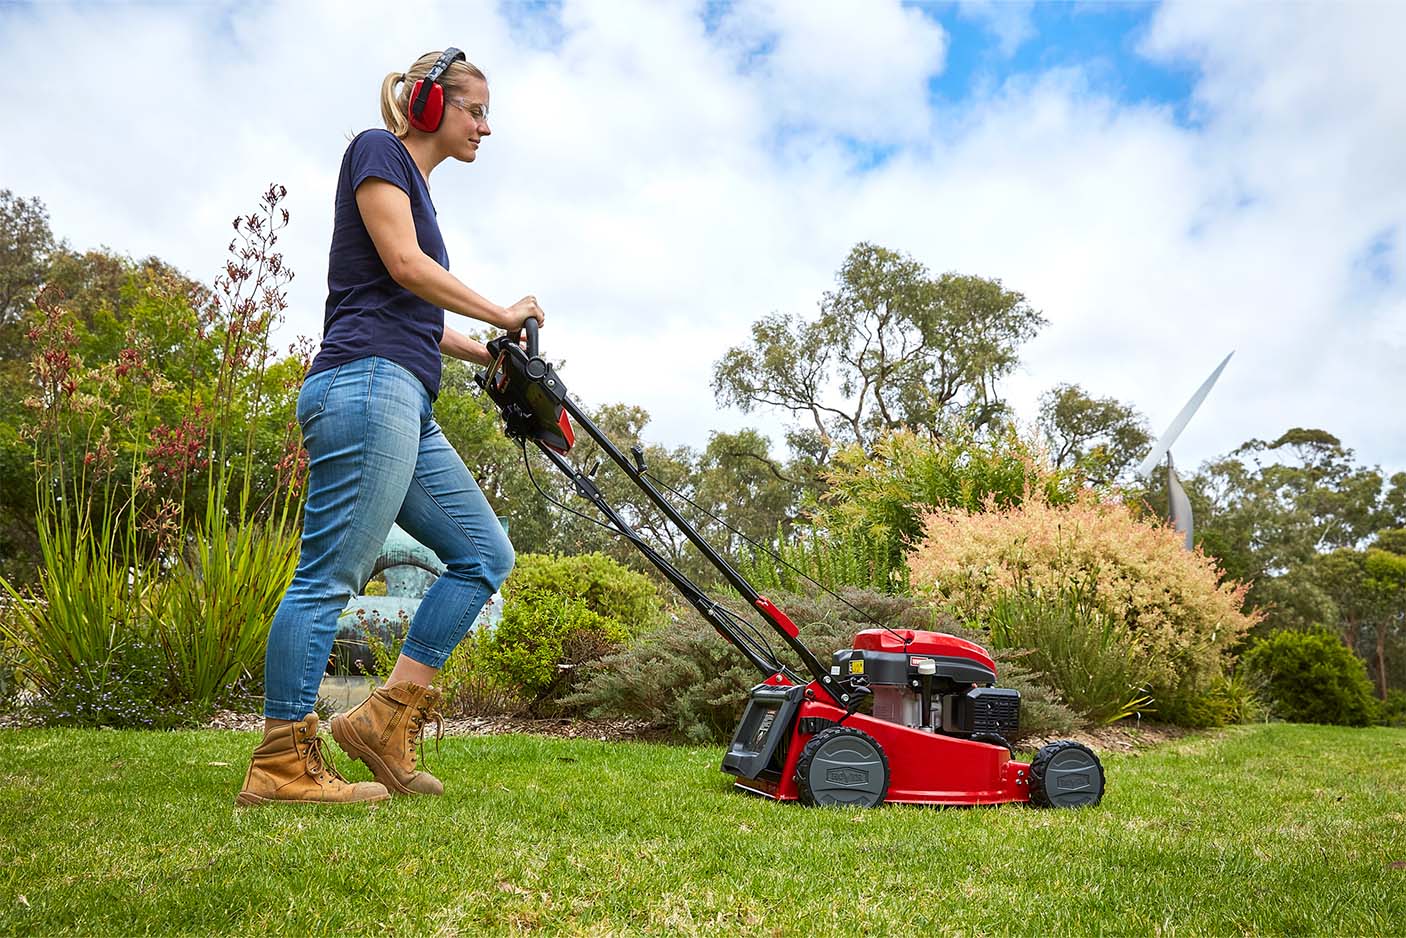 Tips for Lawn Mowing